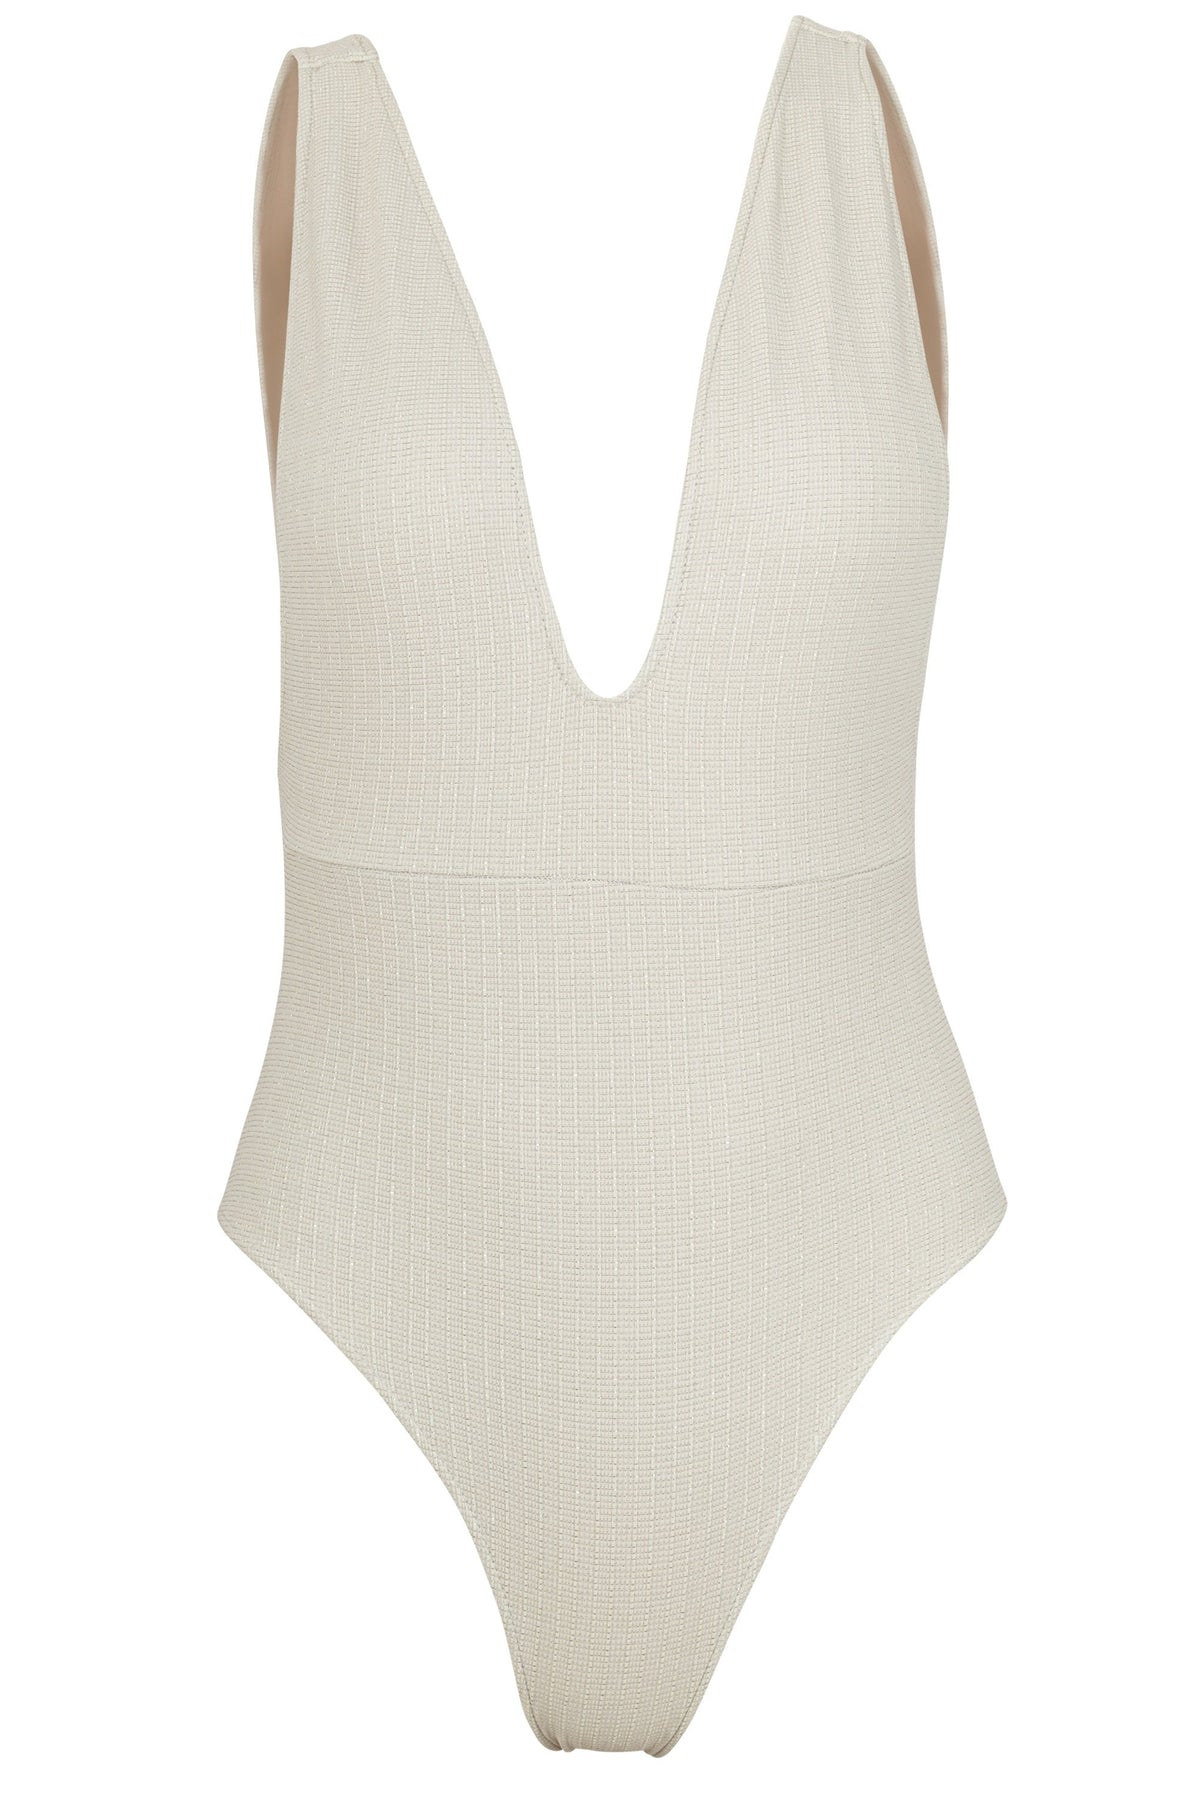 Front image of Helena swimsuit in platinum.